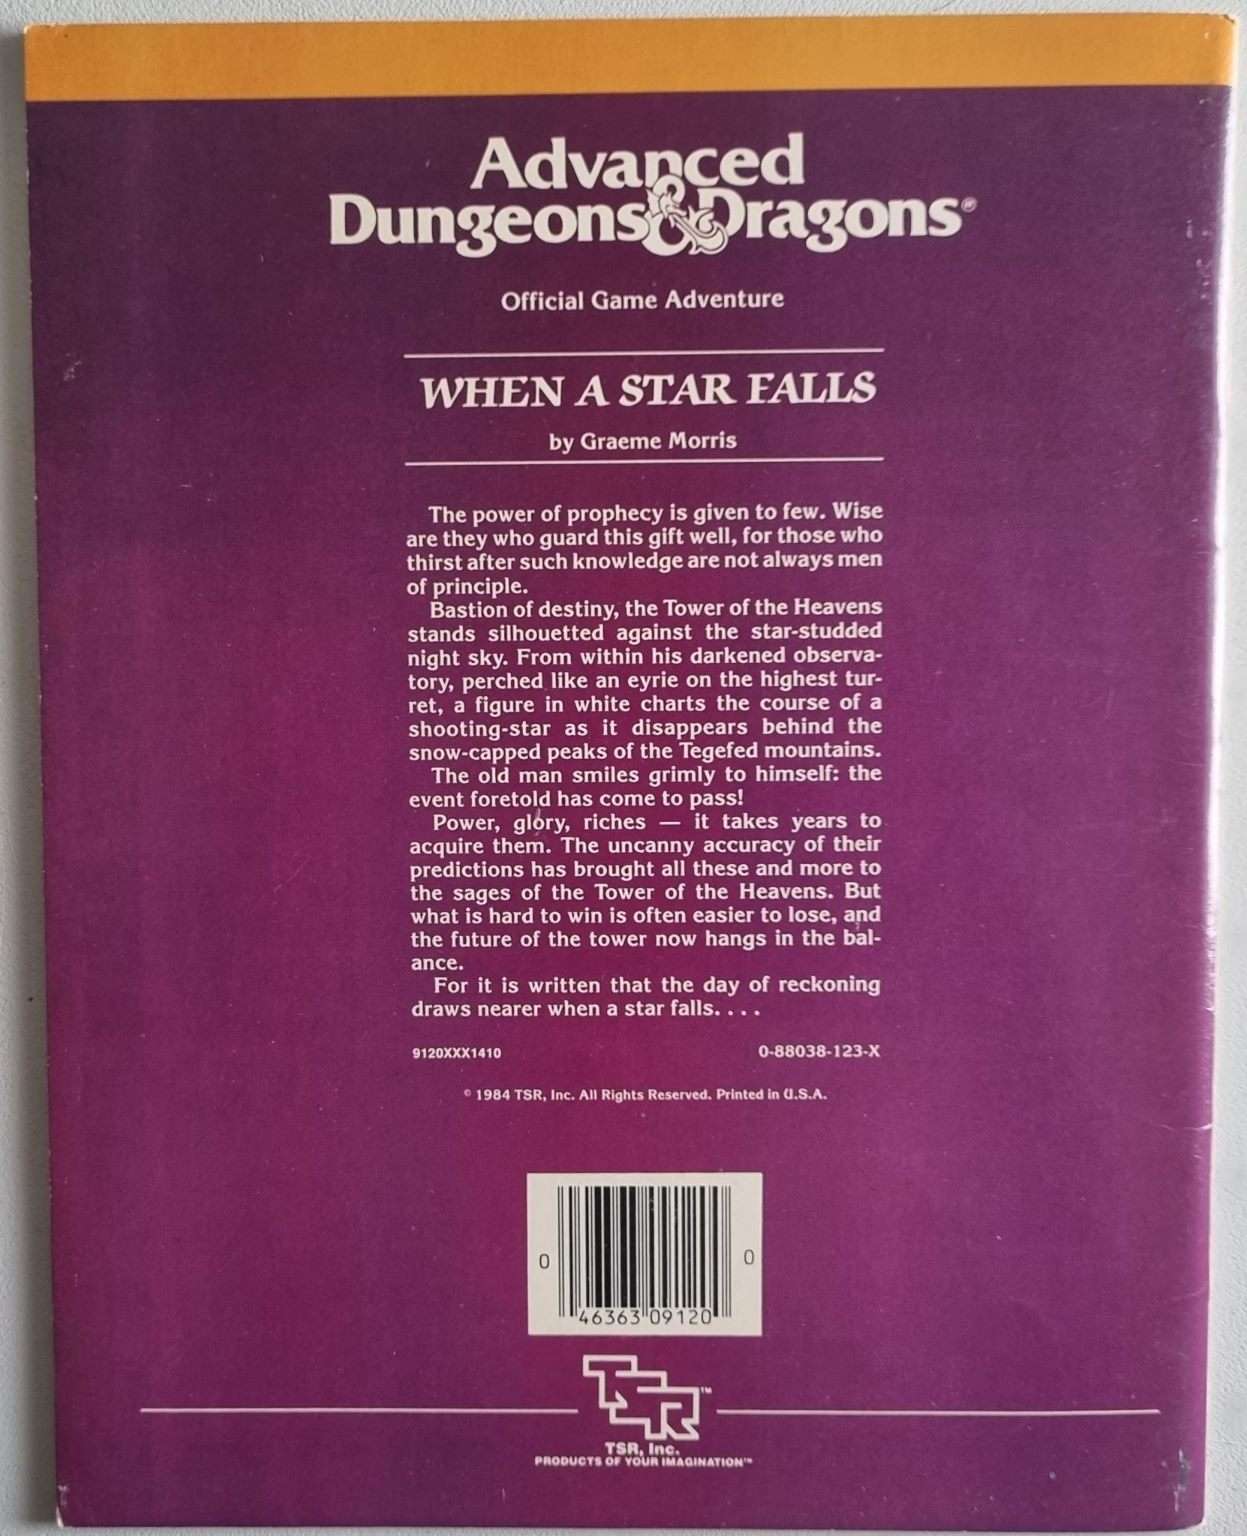 Advanced Dungeons and Dragons - When a Star Falls (UK4 9120) Default Title